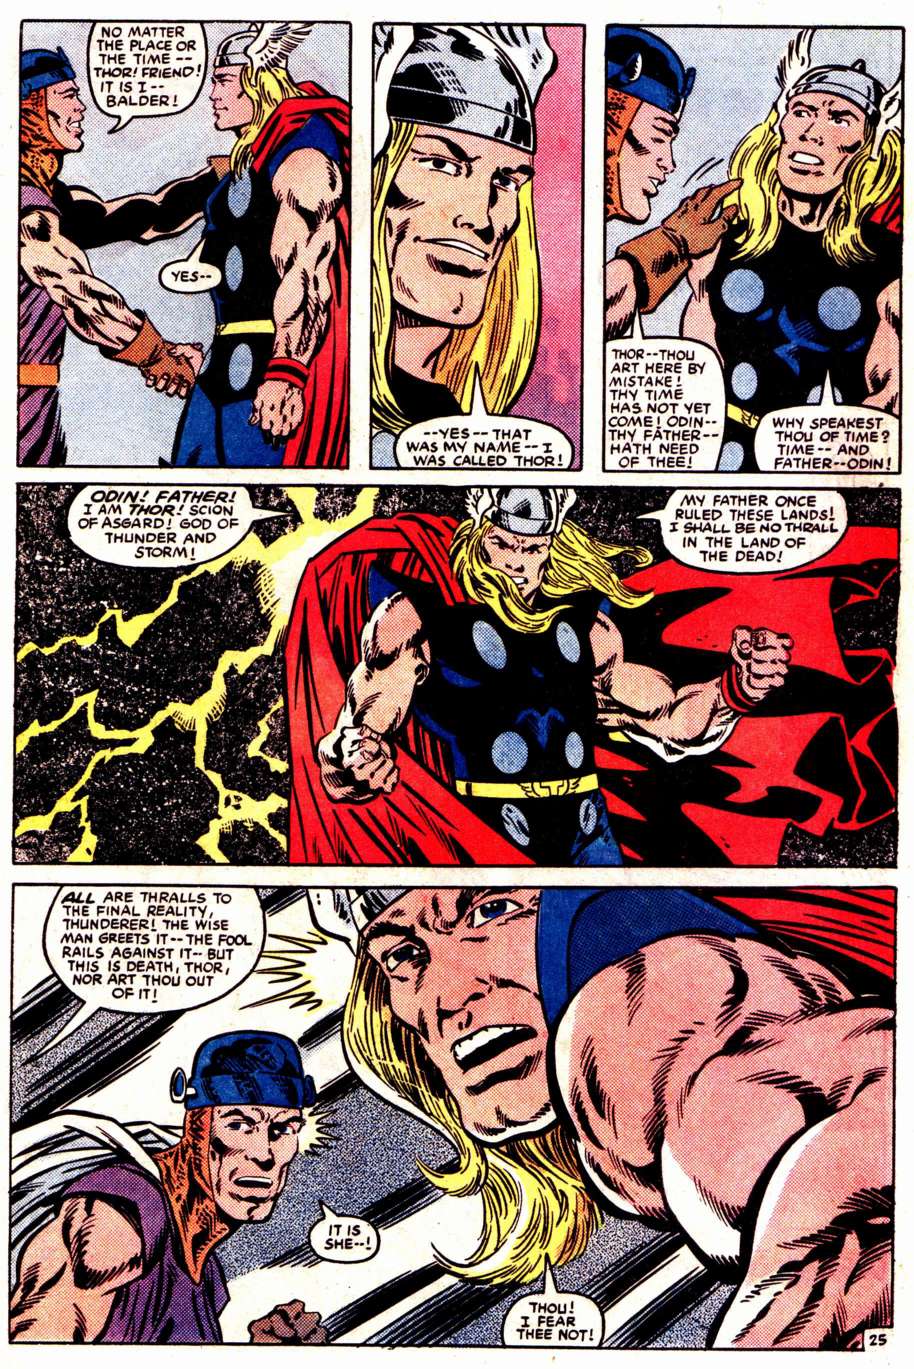 What If? (1977) issue 47 - Loki had found The hammer of Thor - Page 26